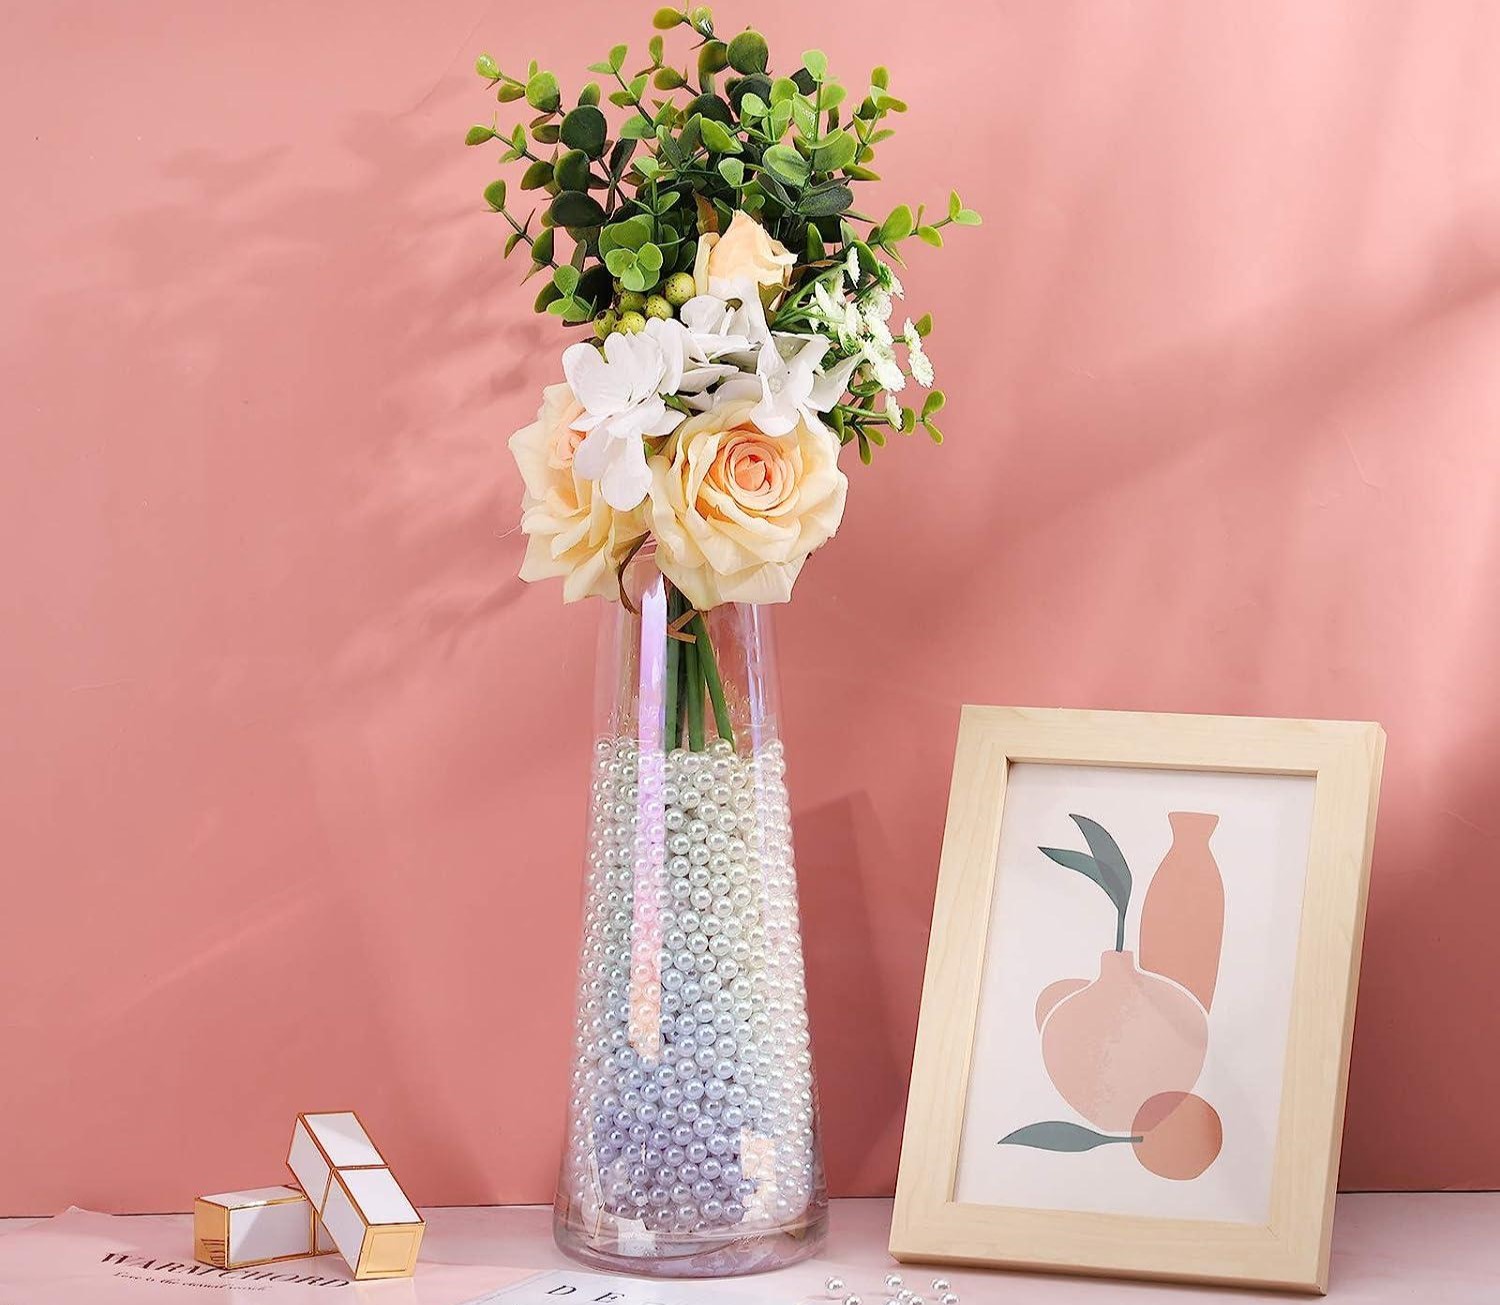 Creative Vase Filler Ideas Using Dollar Store Items - Chas' Crazy